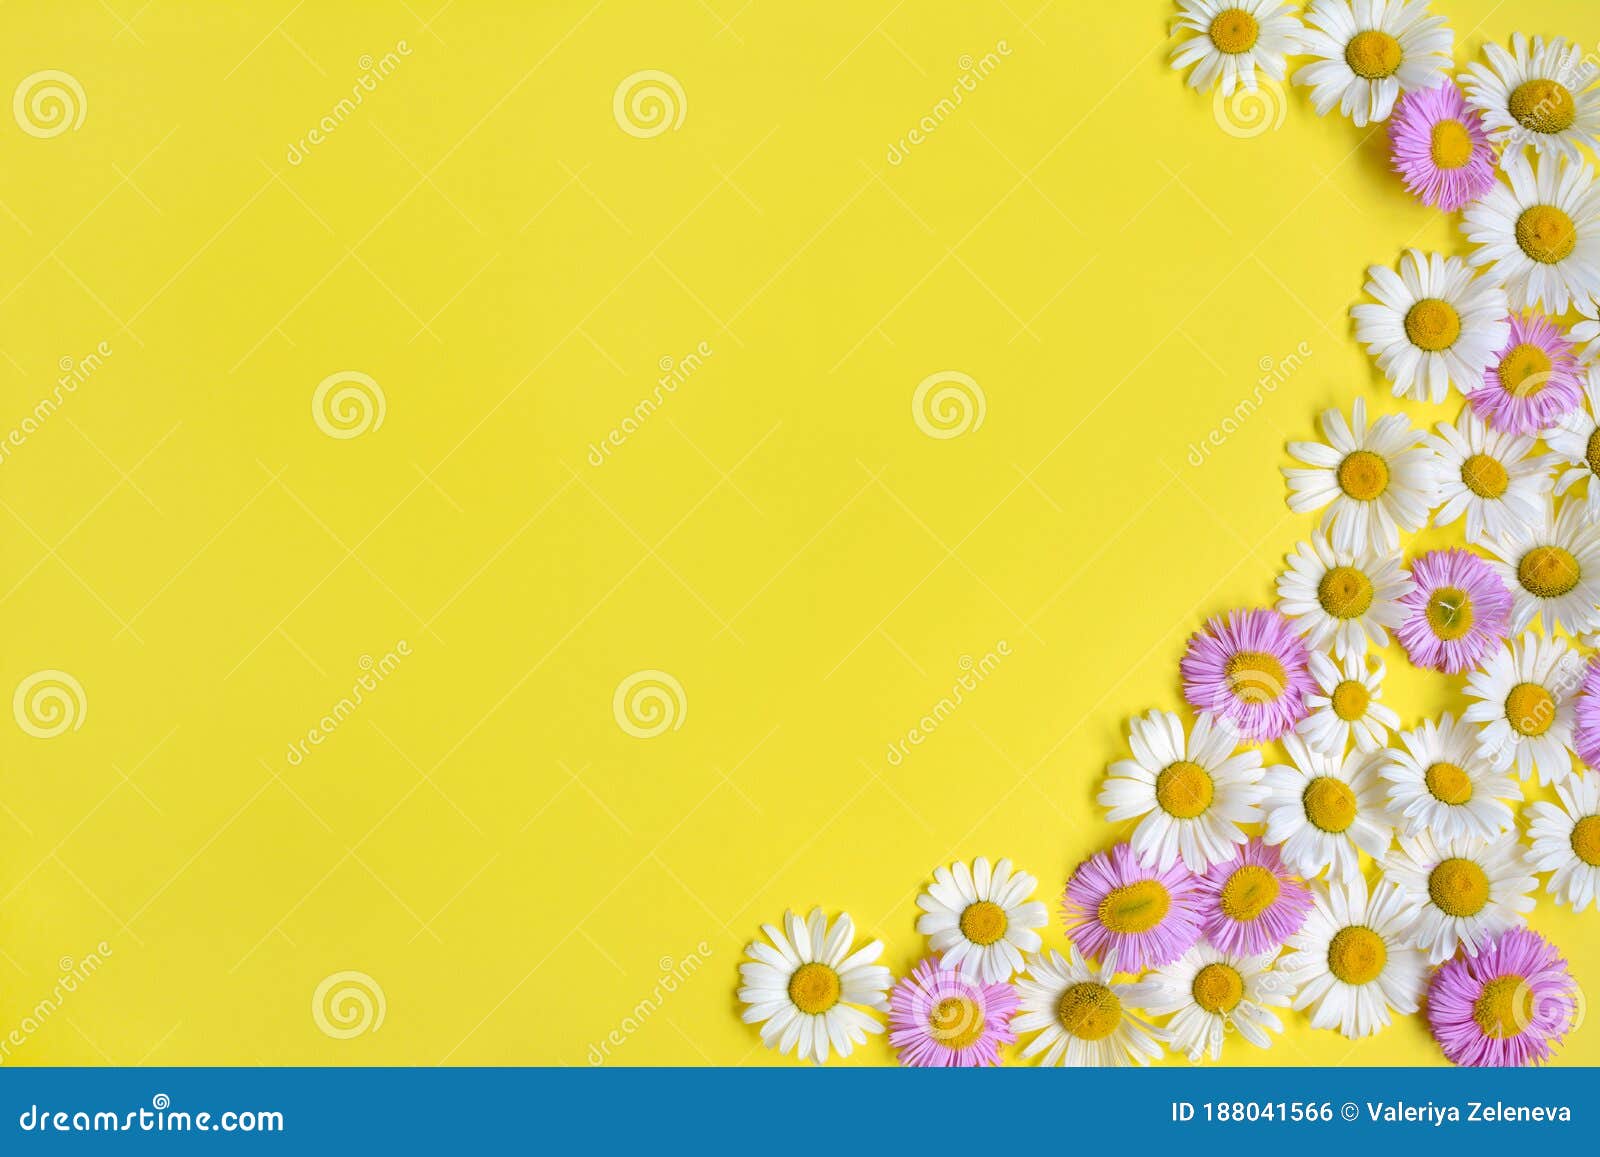 Daisy Flowers and Pink Flowers on a Yellow Background with Side ...